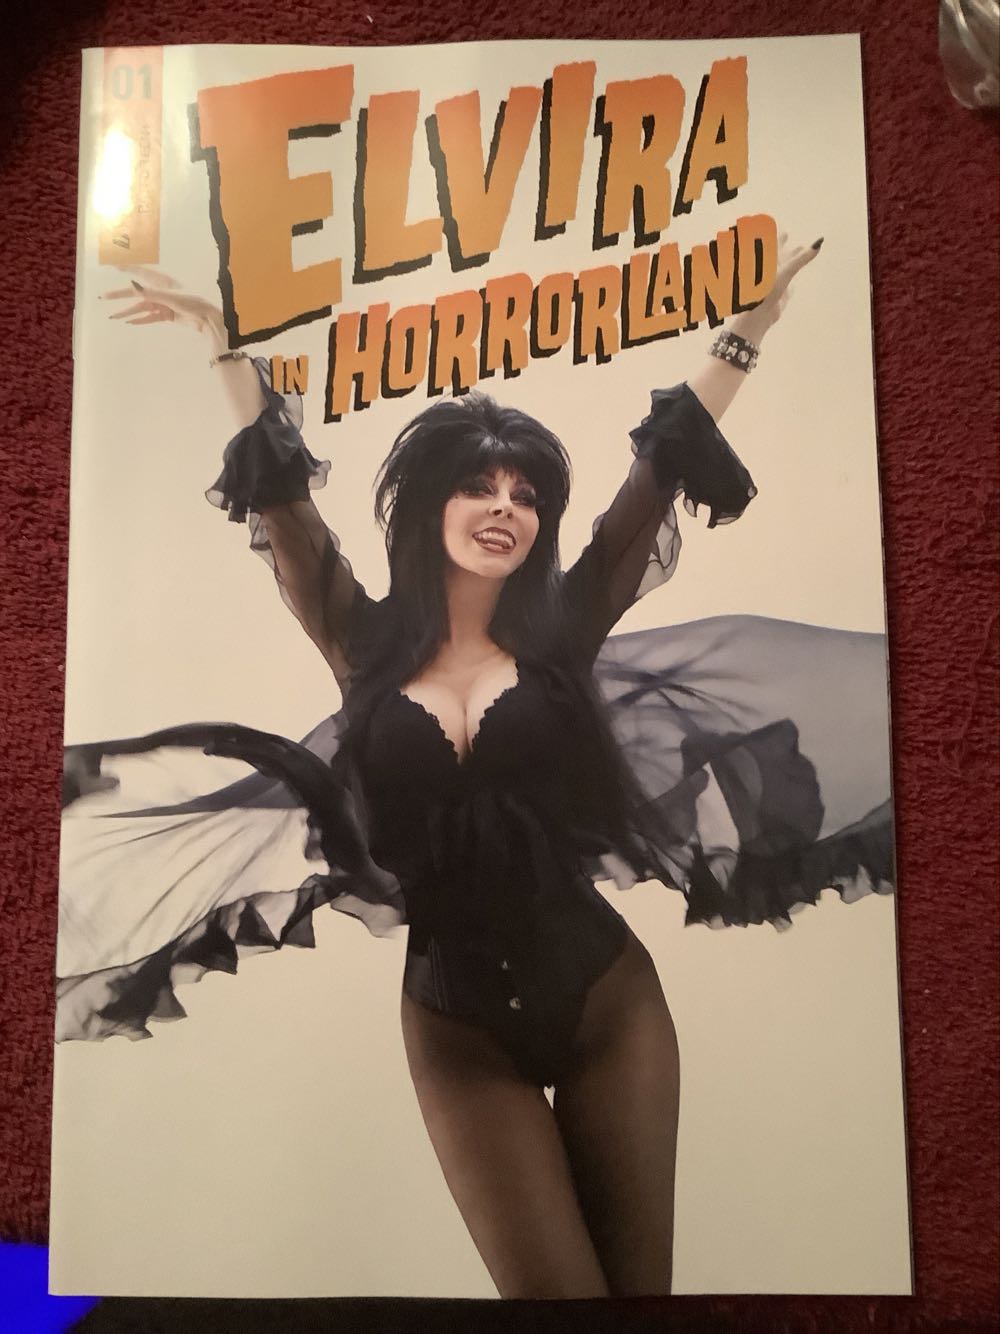 Elvira In Horrorland #1 (Cover D) - Dynamite Entertainement (1 - May 2022) comic book collectible [Barcode 72513031949401041] - Main Image 1